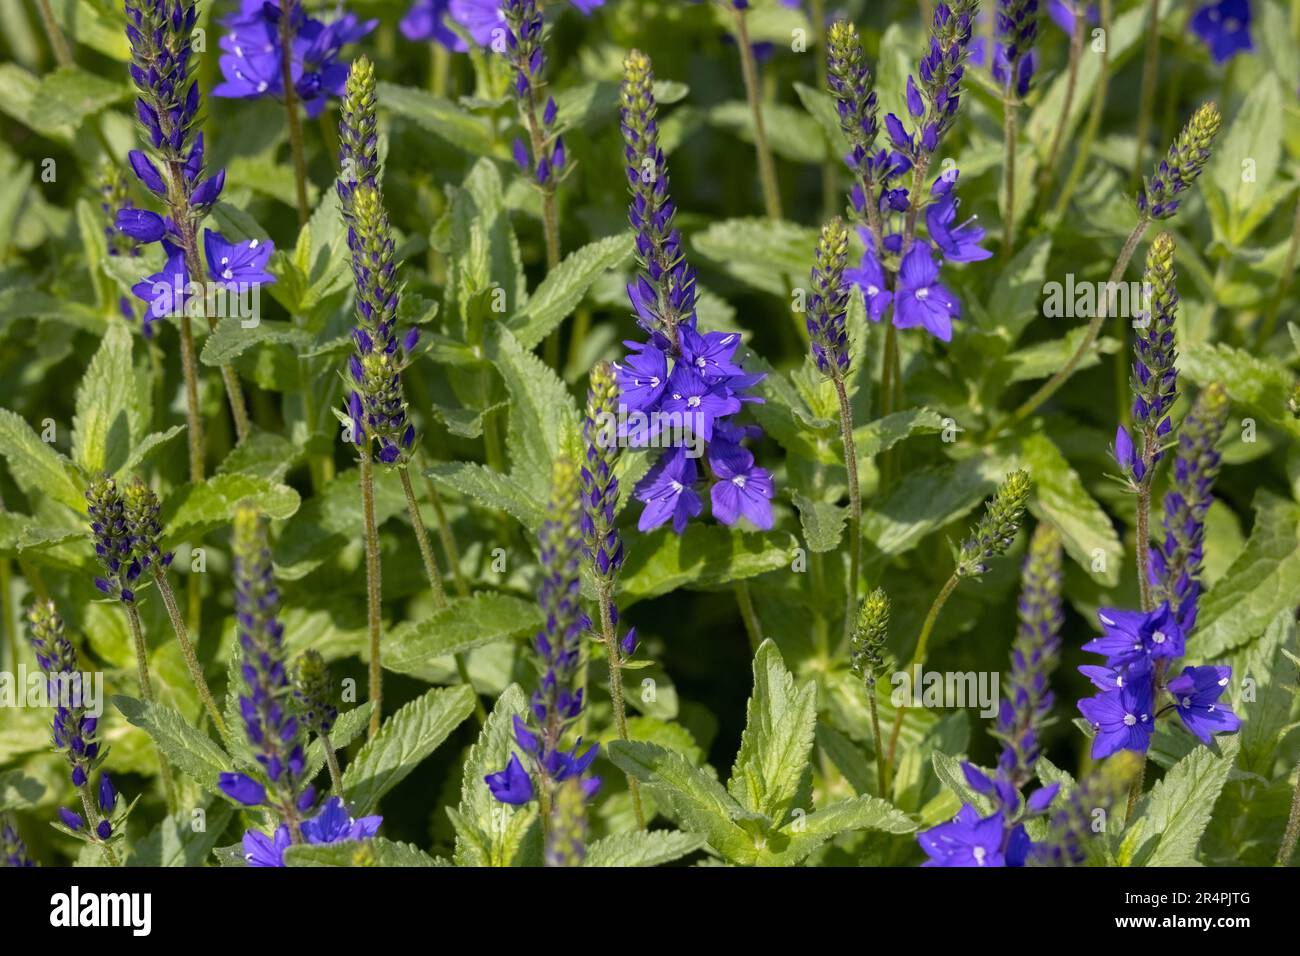 Flowers of Veronica austriaca subsp. teucrium 'Crater Lake Blue' in a garden in early summer Stock Photo